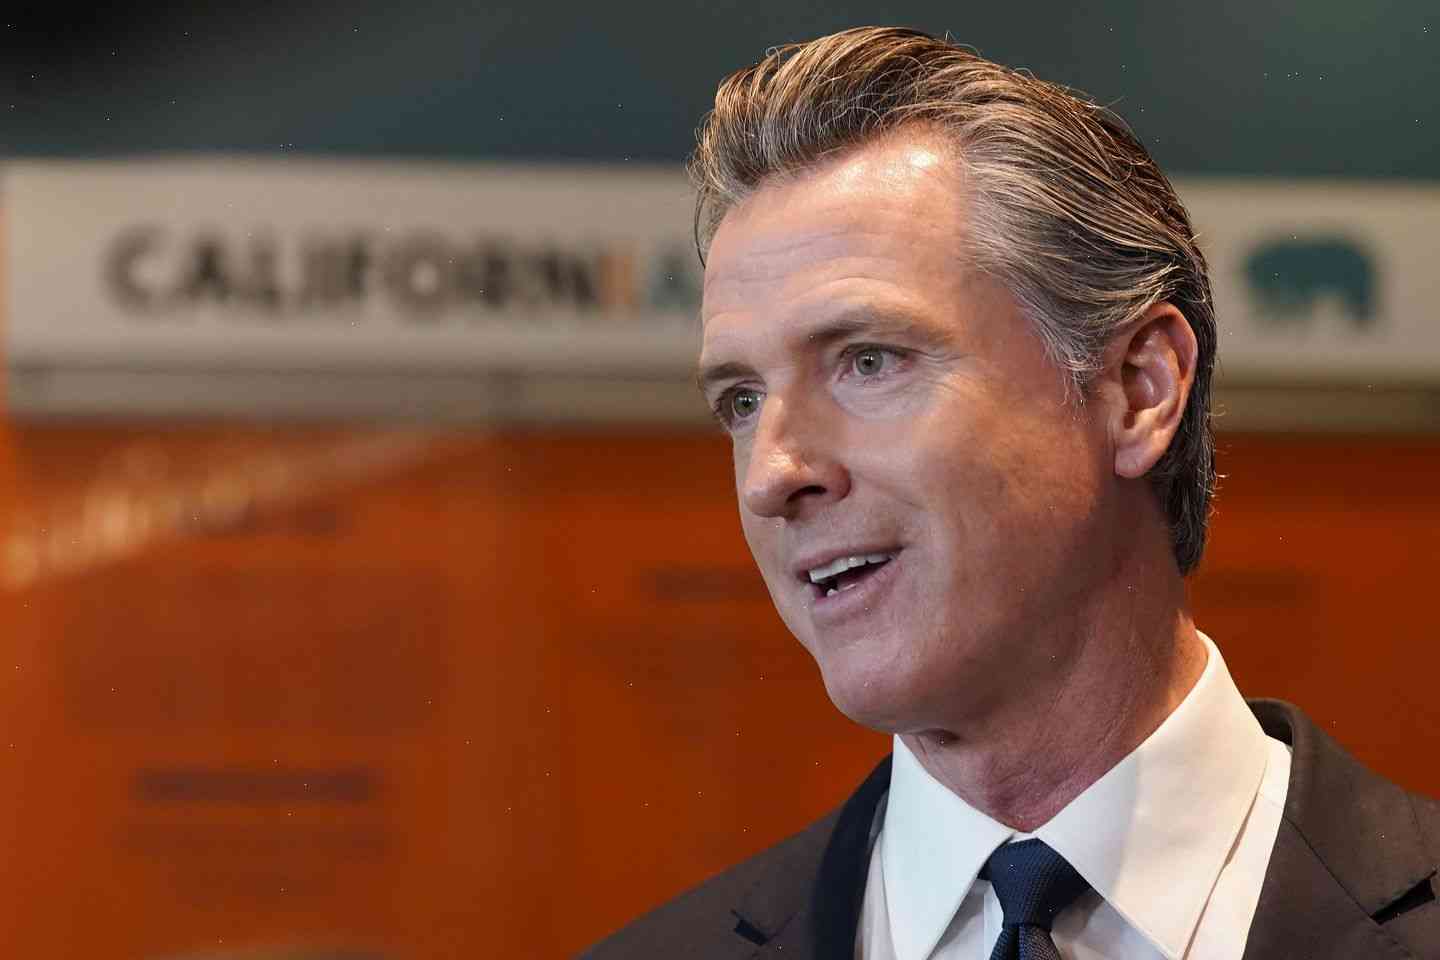 Biden and Newsom meet on campaign trail in California